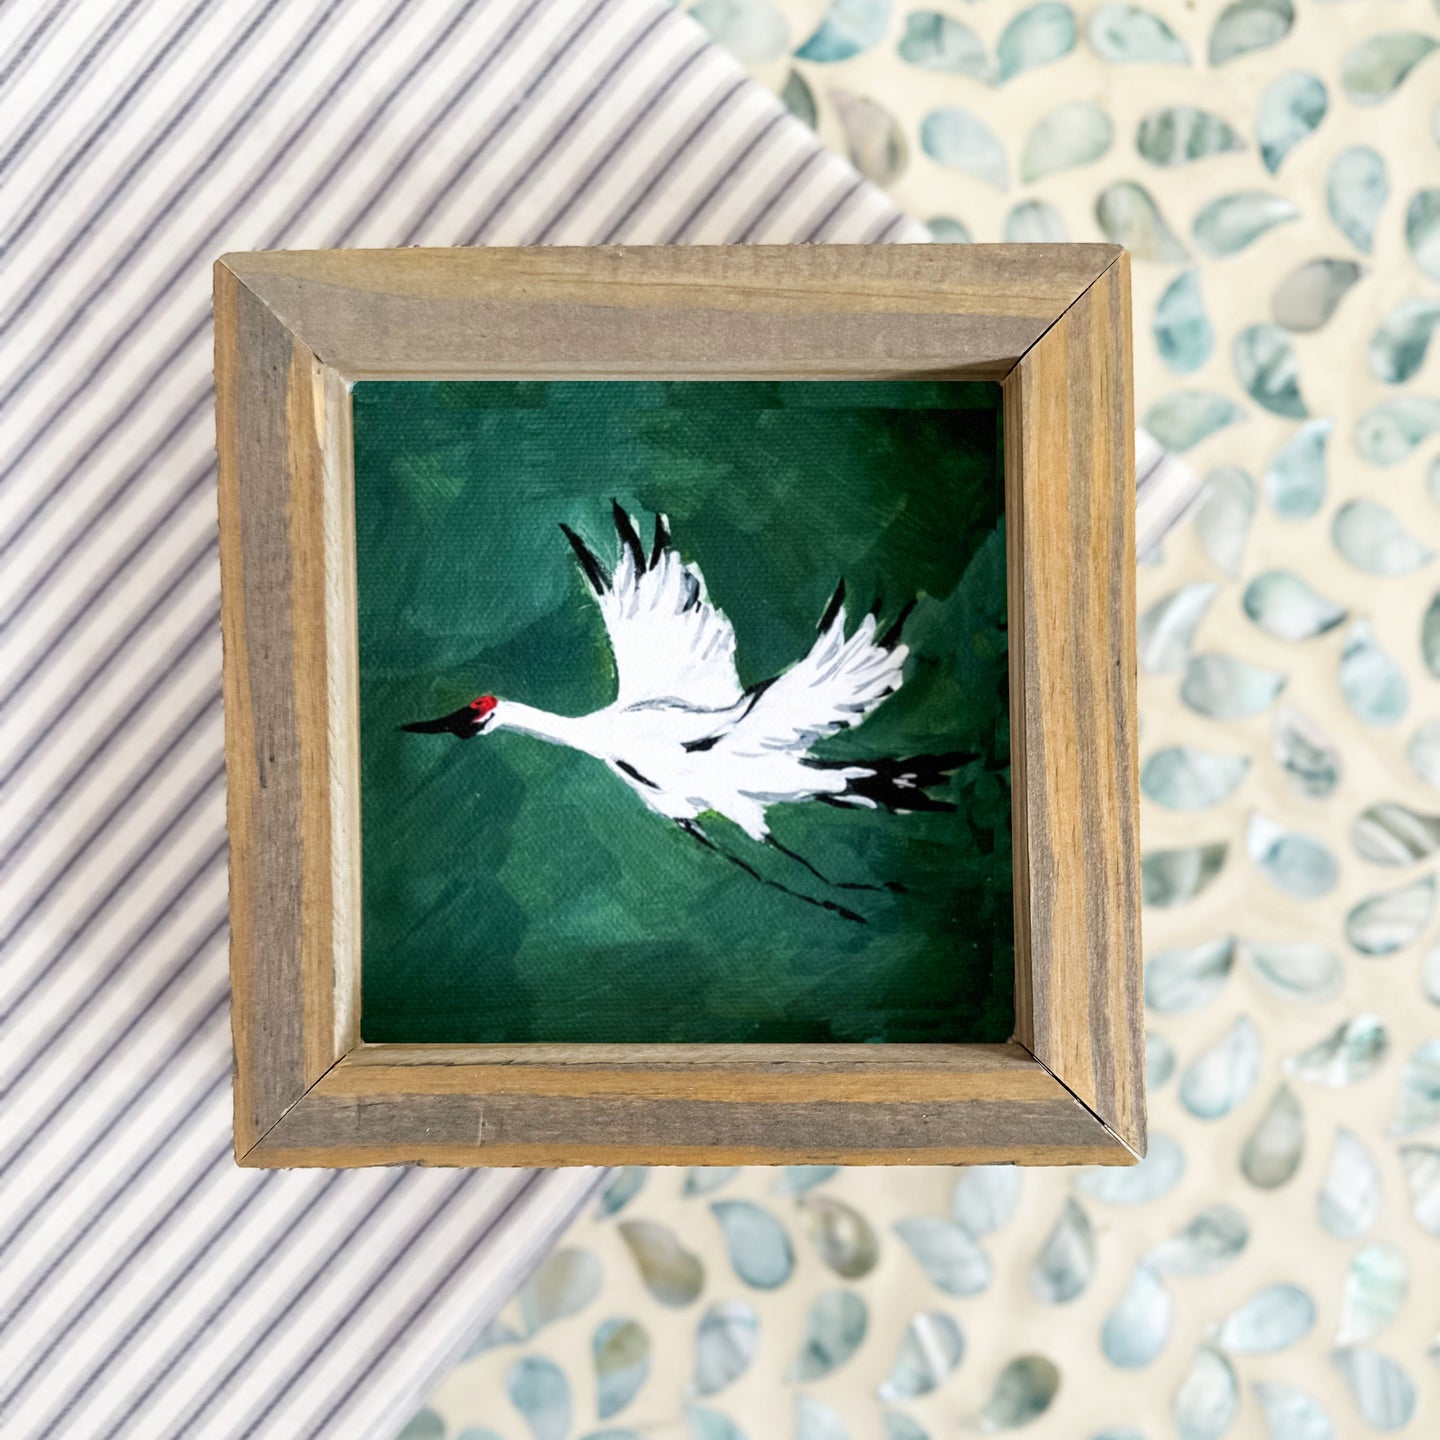 Crane in Flight, with Handmade Wooden Tabletop Frame